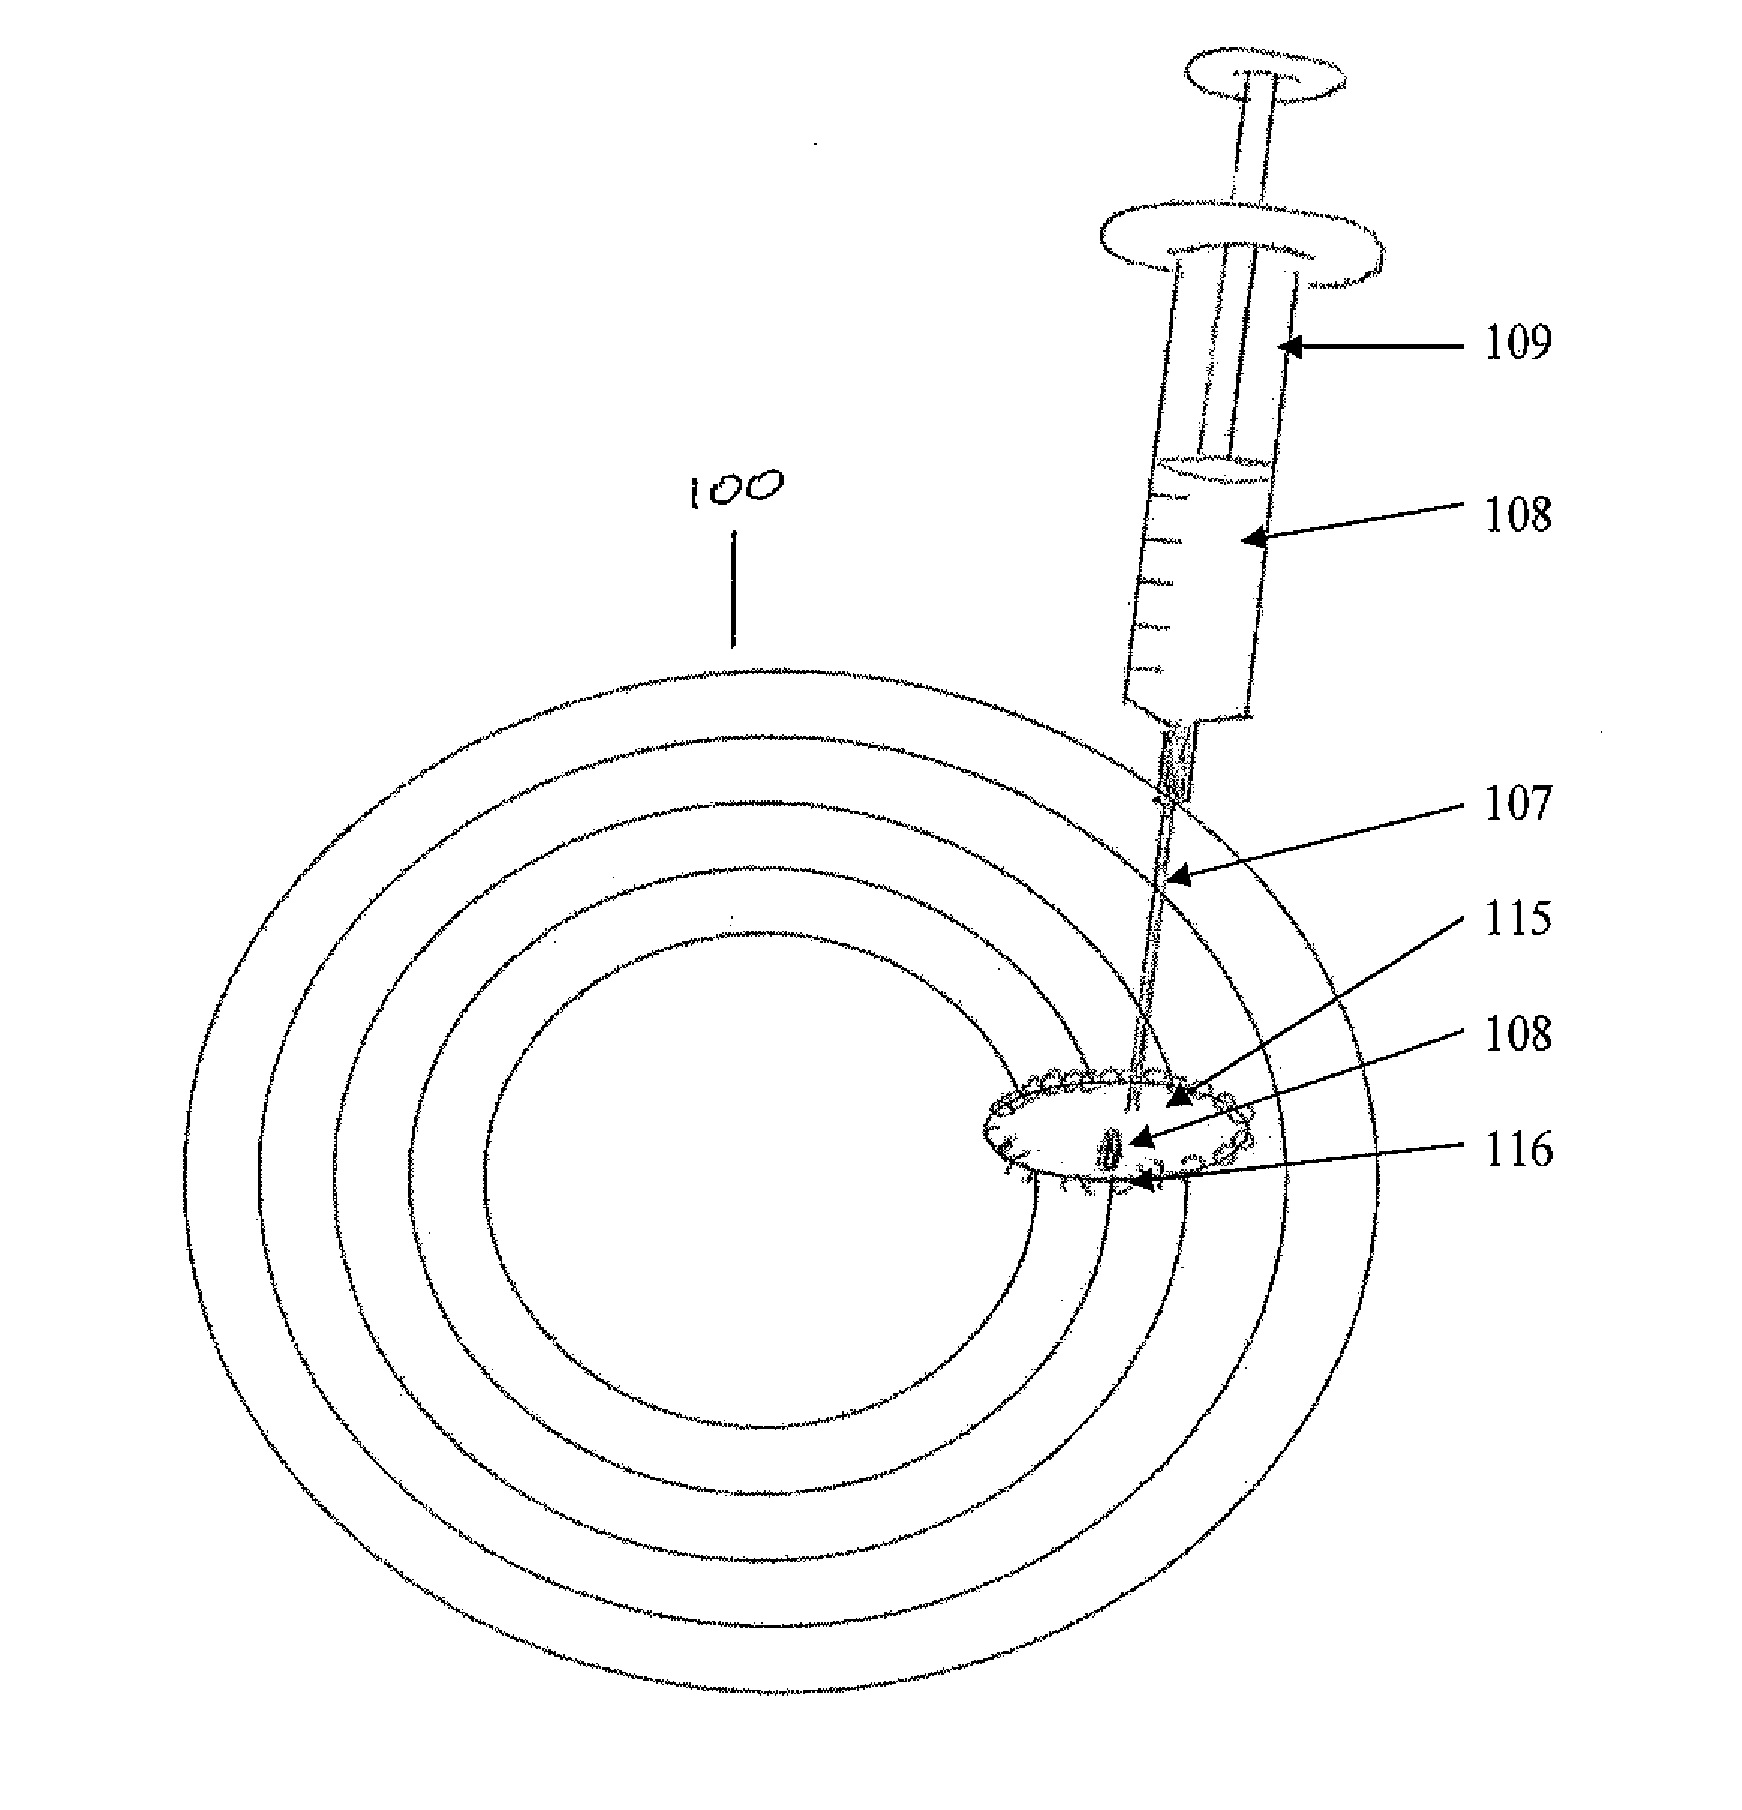 Composition and Method of Using Medicament for Treatment of Cancers and Tumors